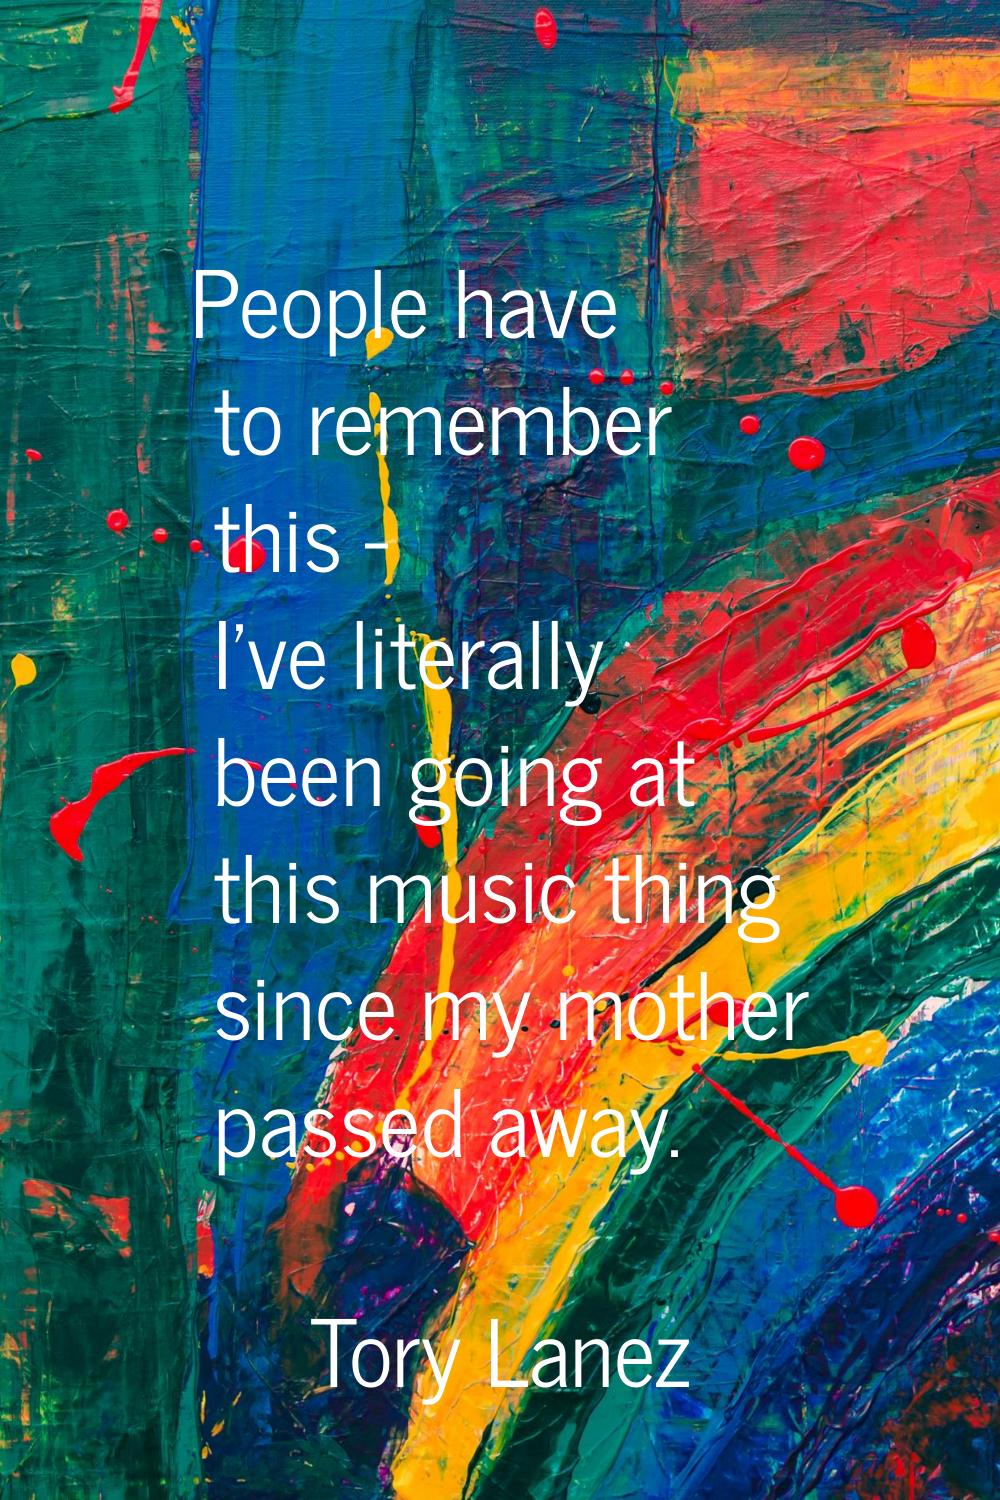 People have to remember this - I've literally been going at this music thing since my mother passed